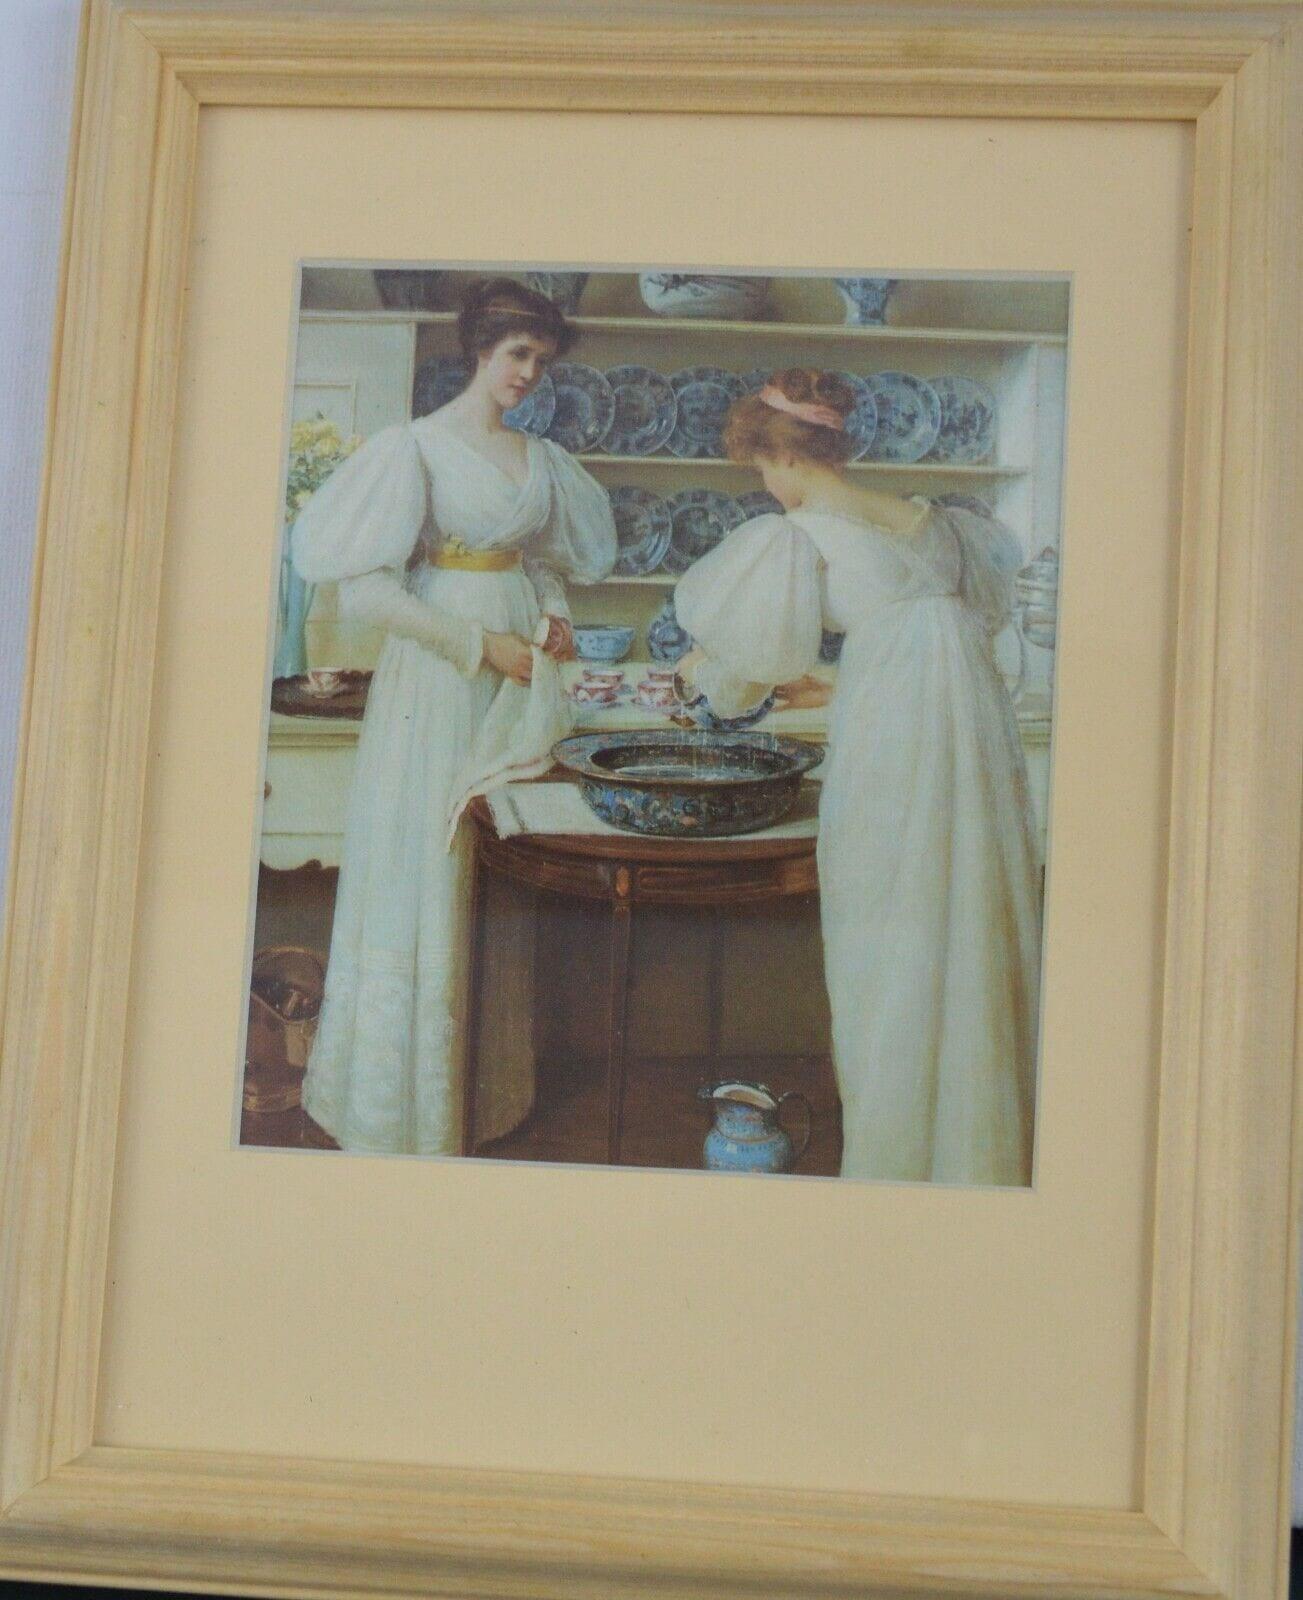 TWO FRAMED PRINTS DEPICTING DOMESTIC STYLE SCENES - TMD167207